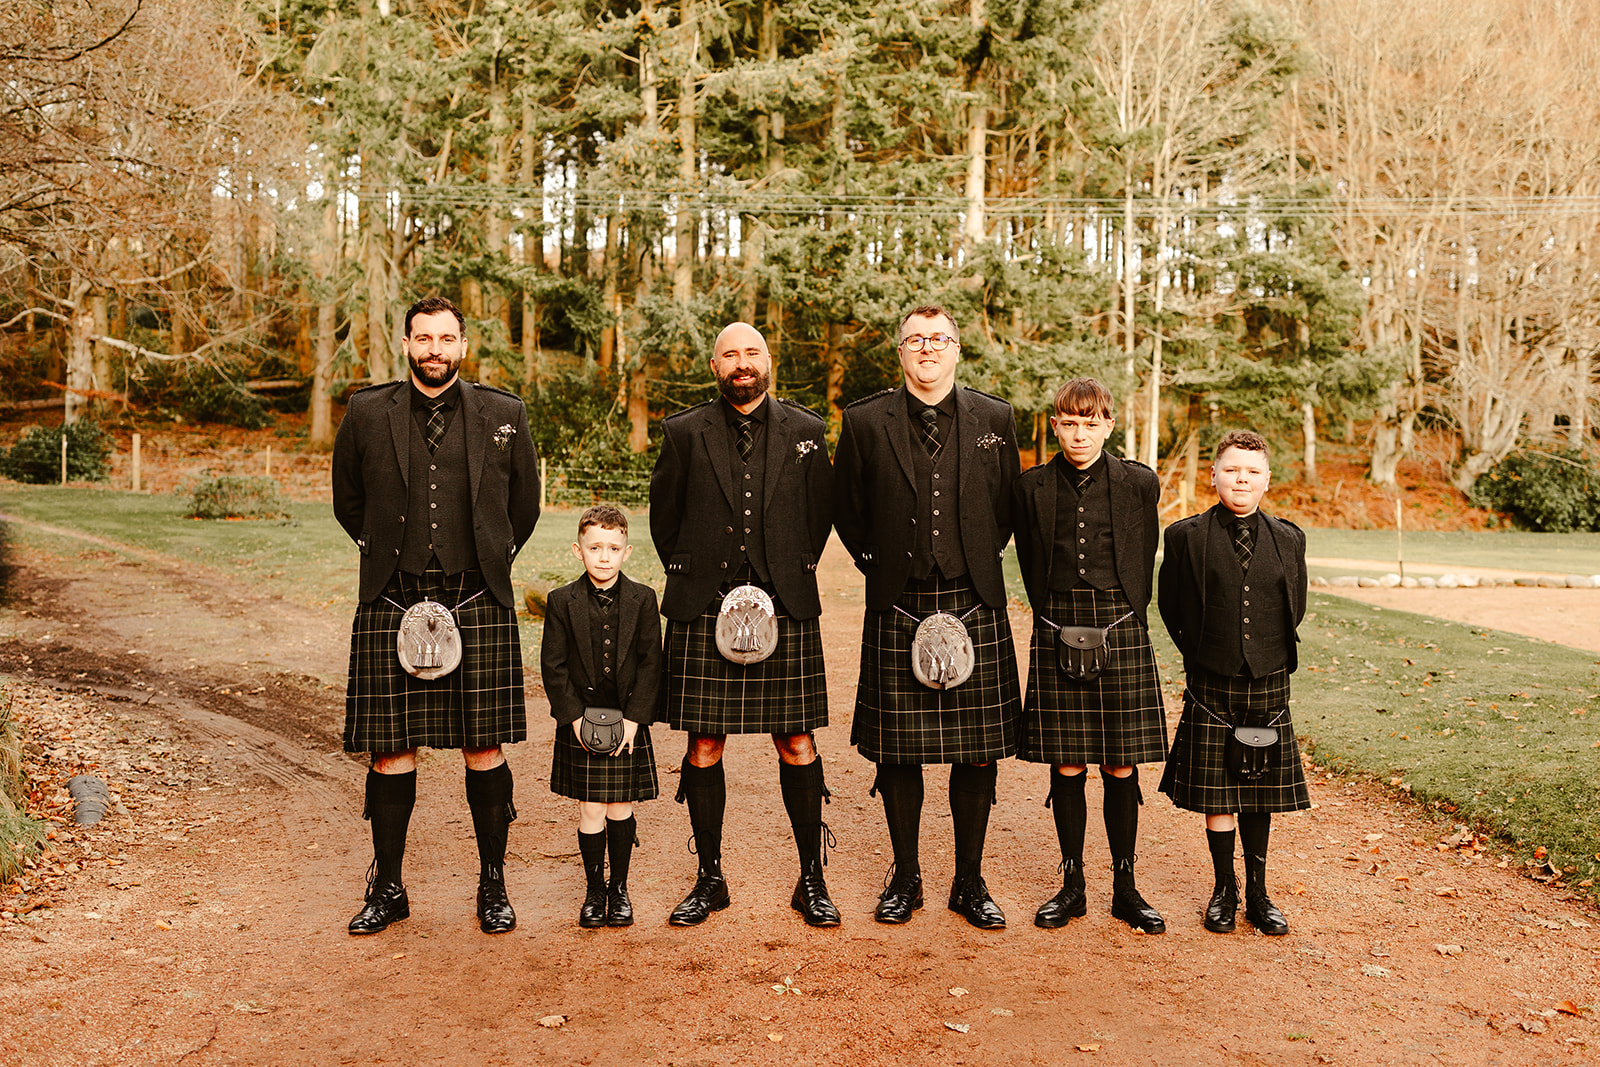 groom with groomsmen pose for a photo